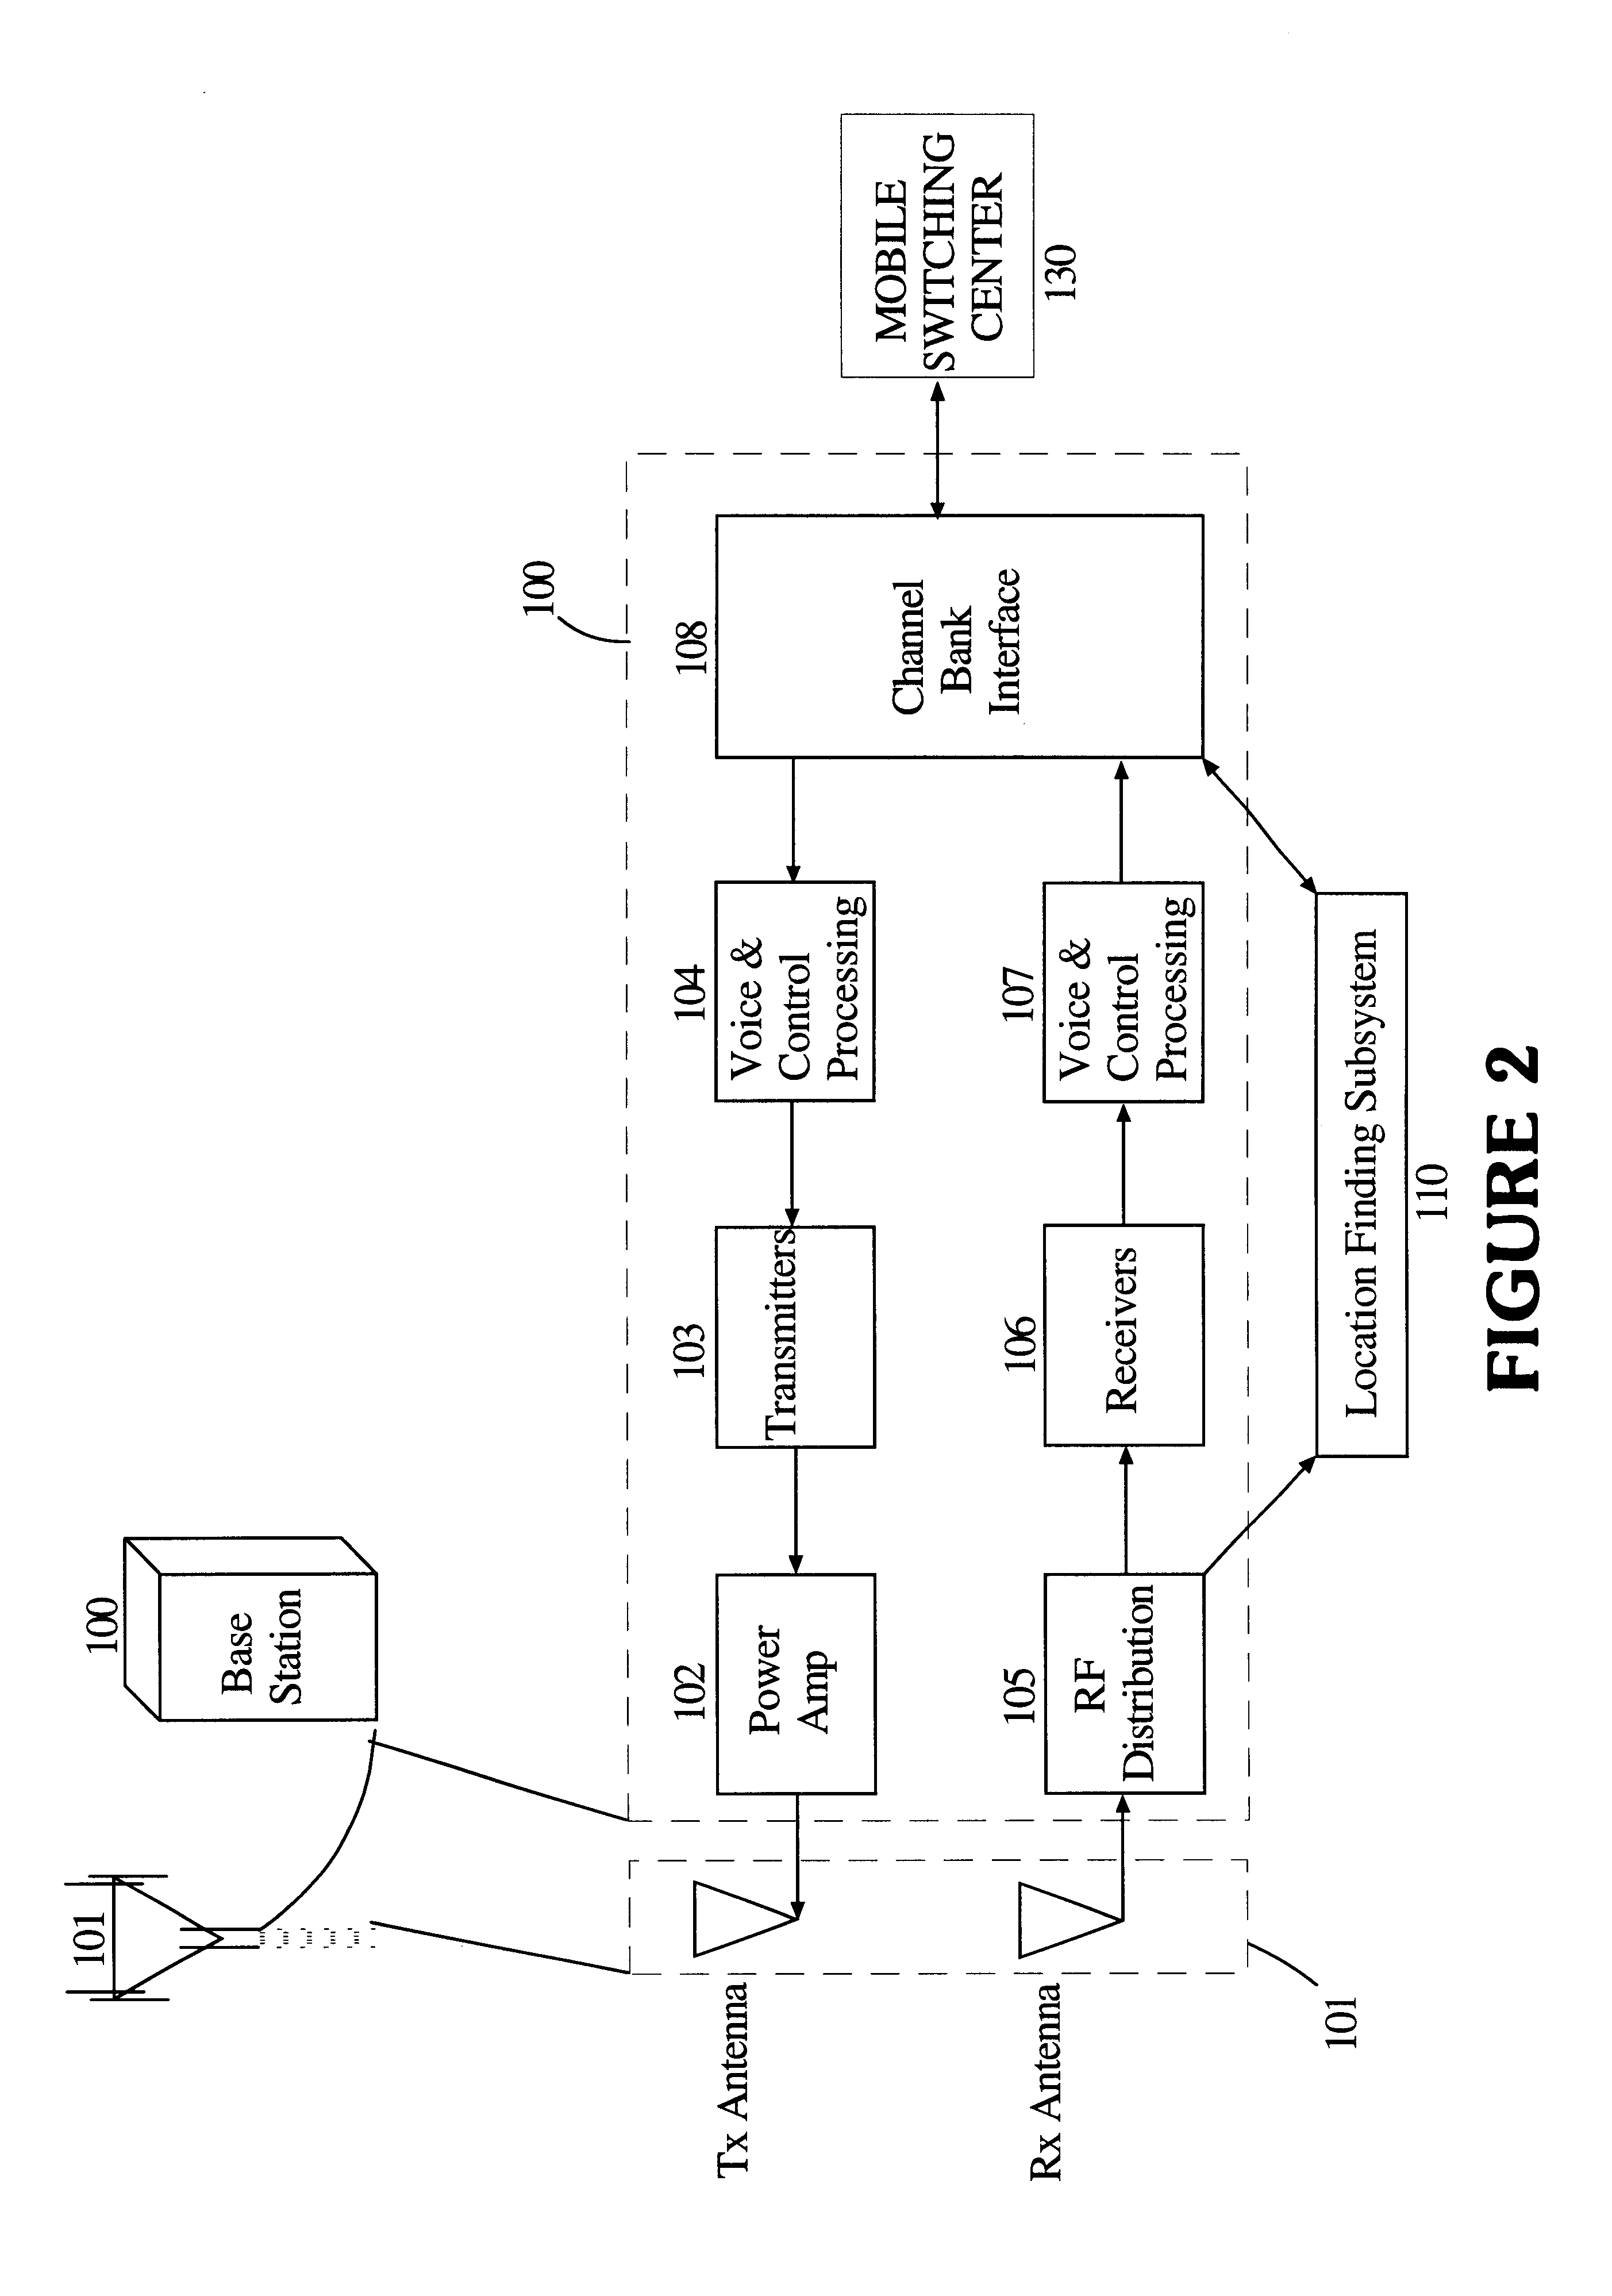 System and method for geolocating a wireless mobile unit from a single base station using repeatable ambiguous measurements